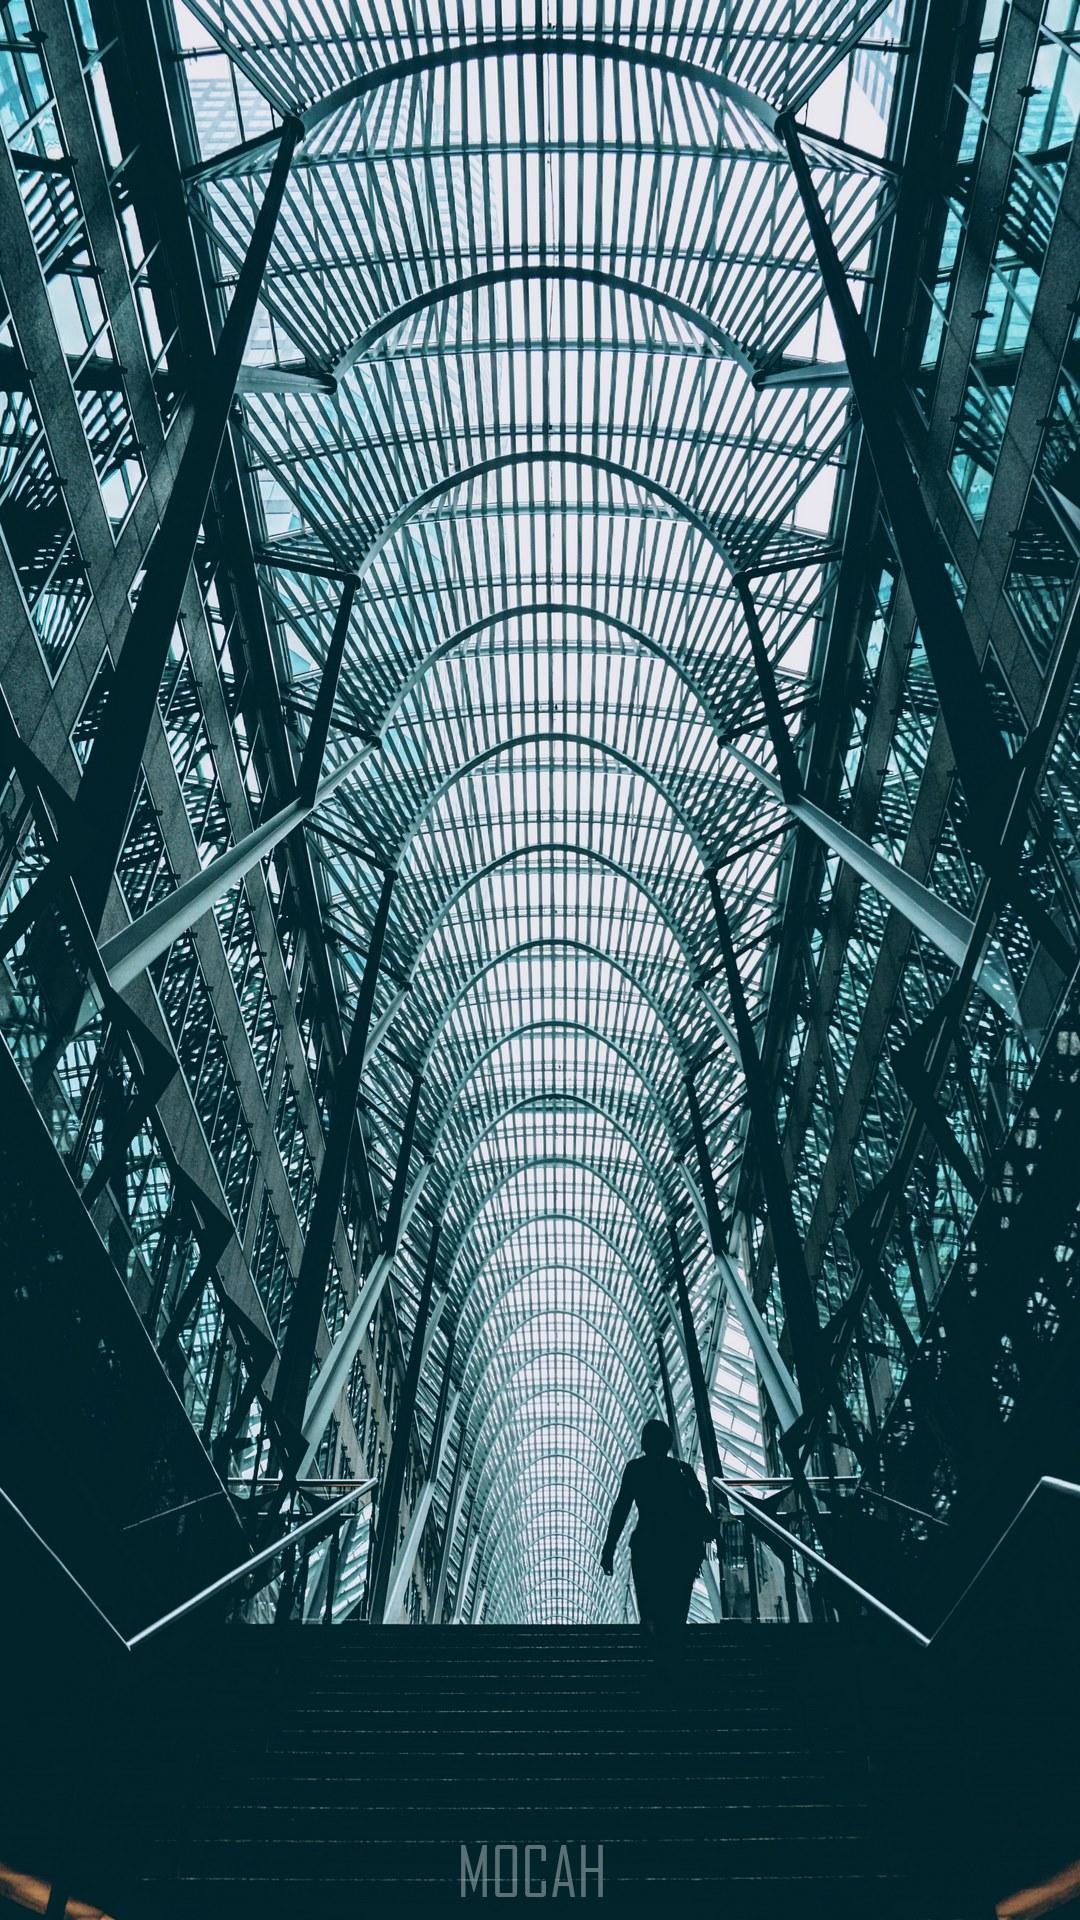 HD wallpaper, Huawei Nova 2 Plus Screensaver, 1080X1920, Atrium Staircase, A Silhouette On Stairs In A High Ceiling Atrium In An Office Complex In Toronto